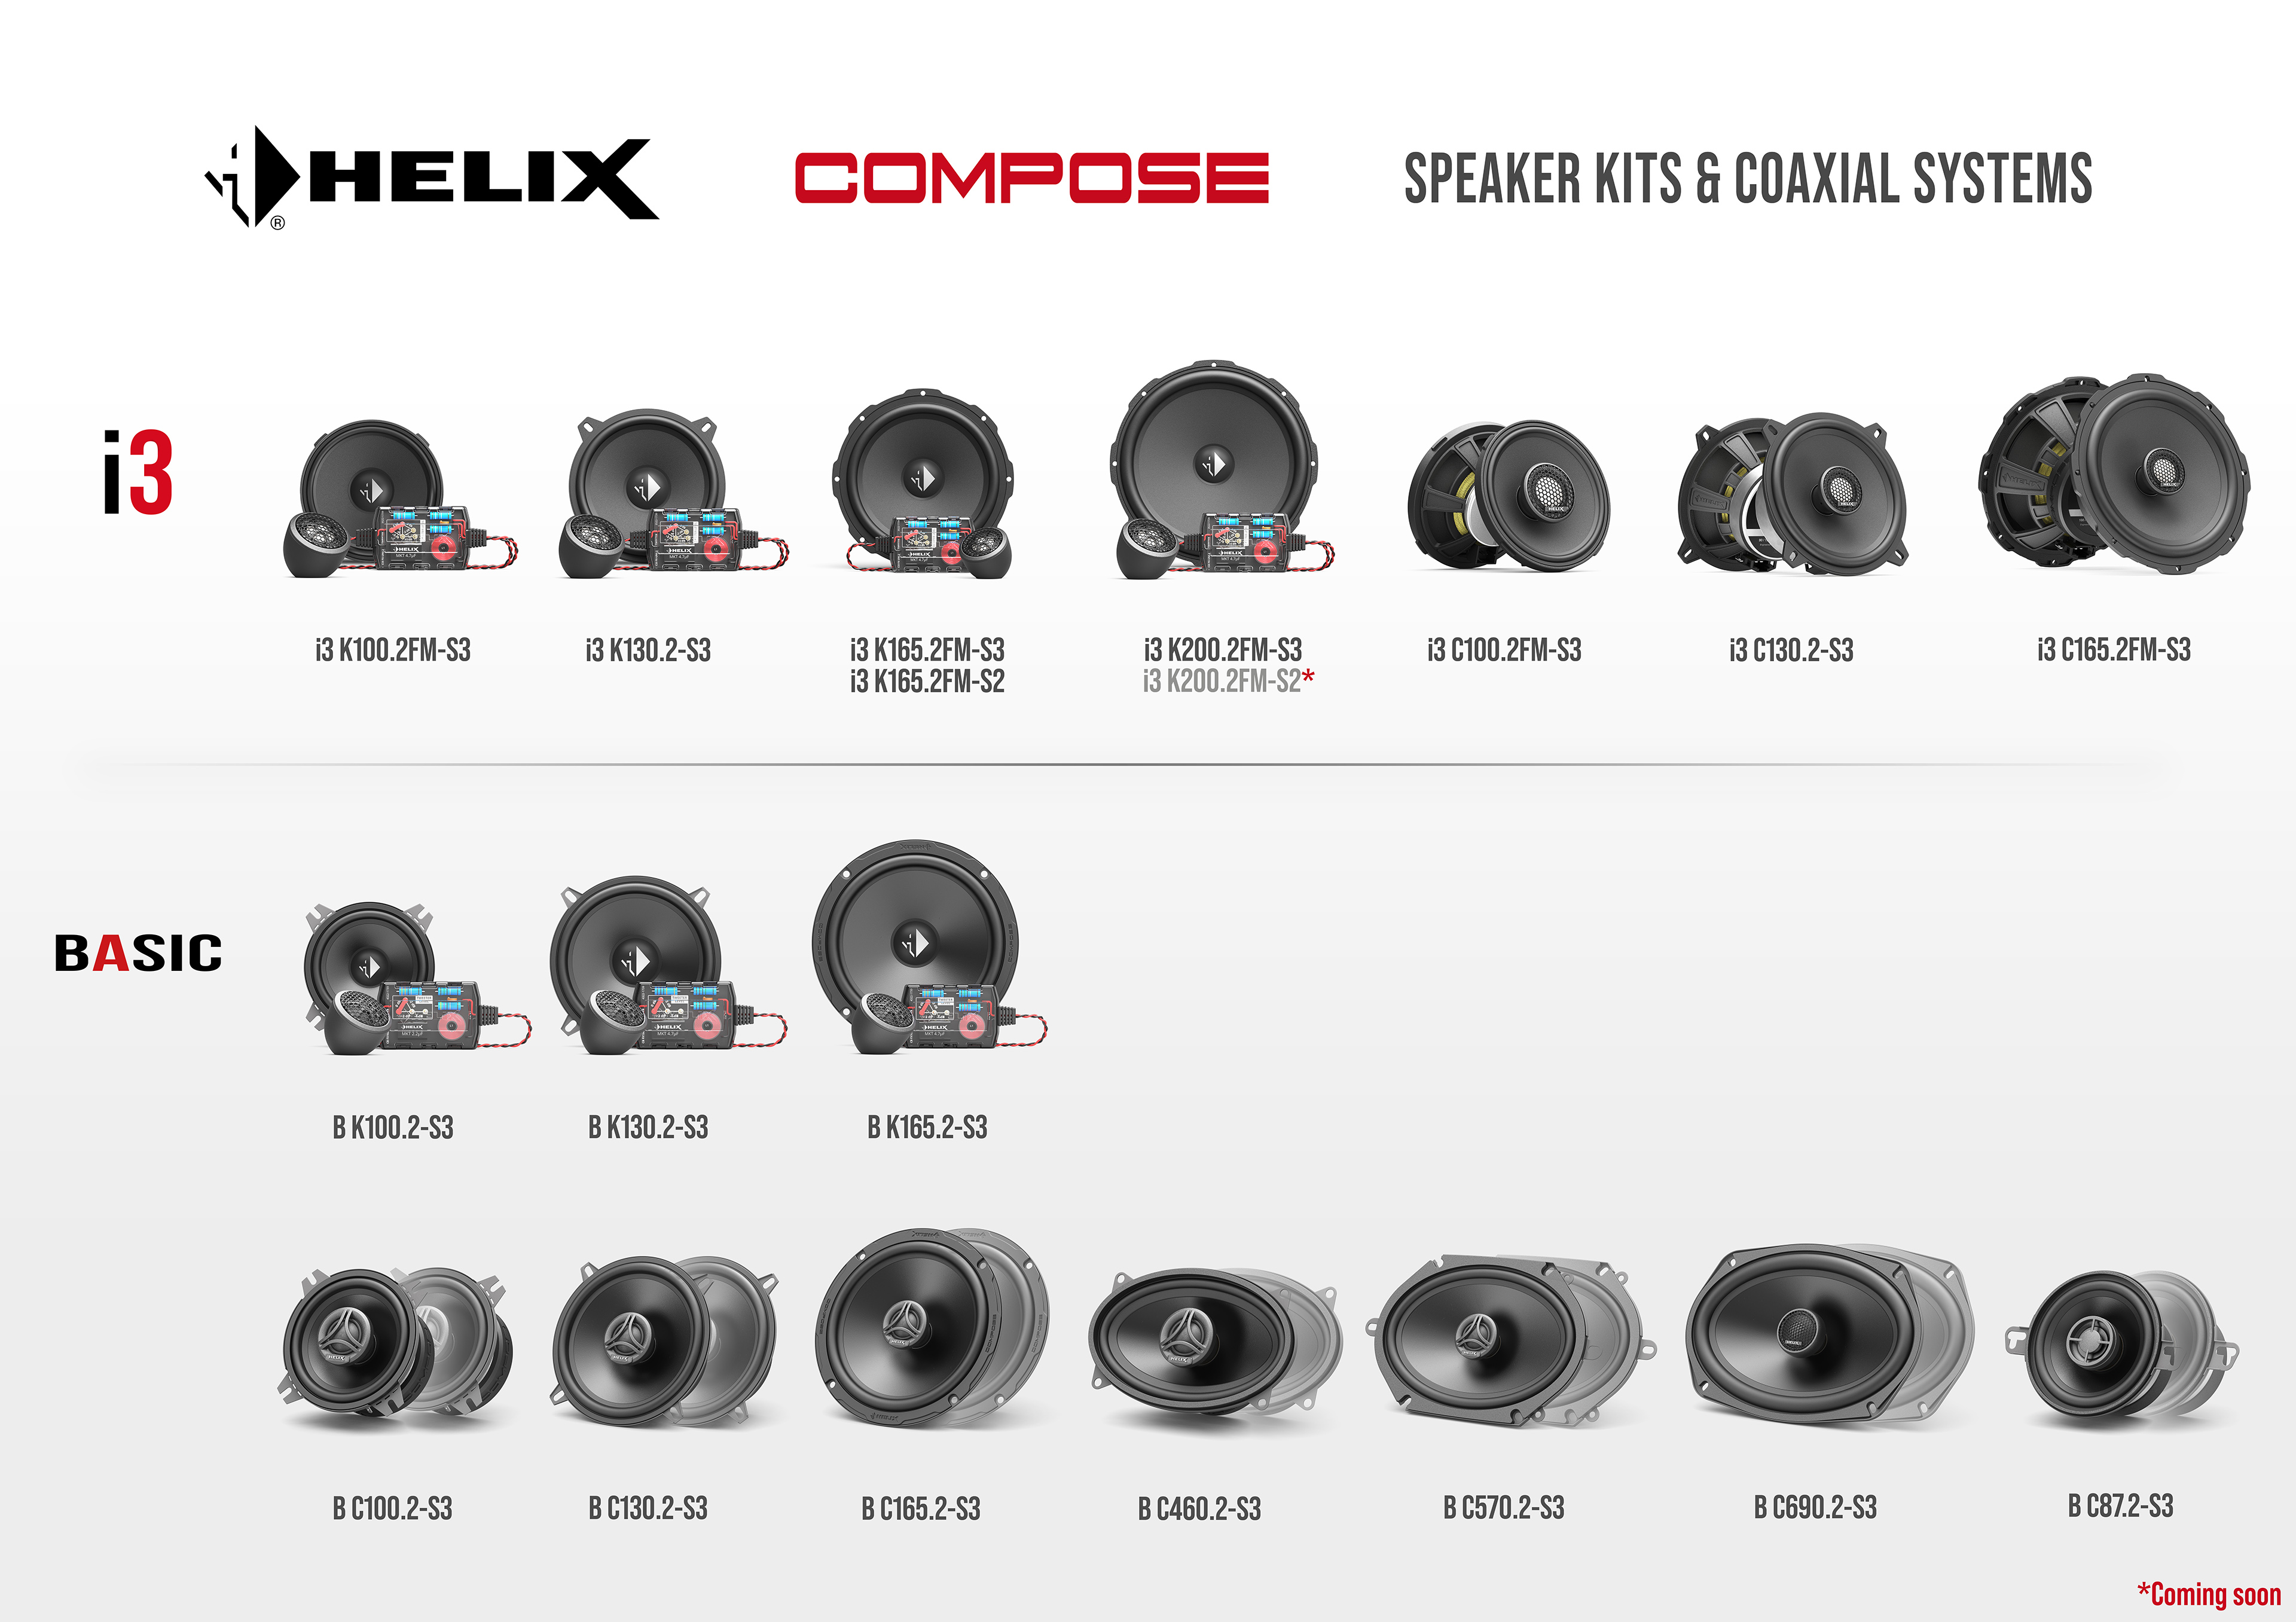 HELIX COMPOSE SPEAKER KITS & COAXIAL SYSTEMS Overview